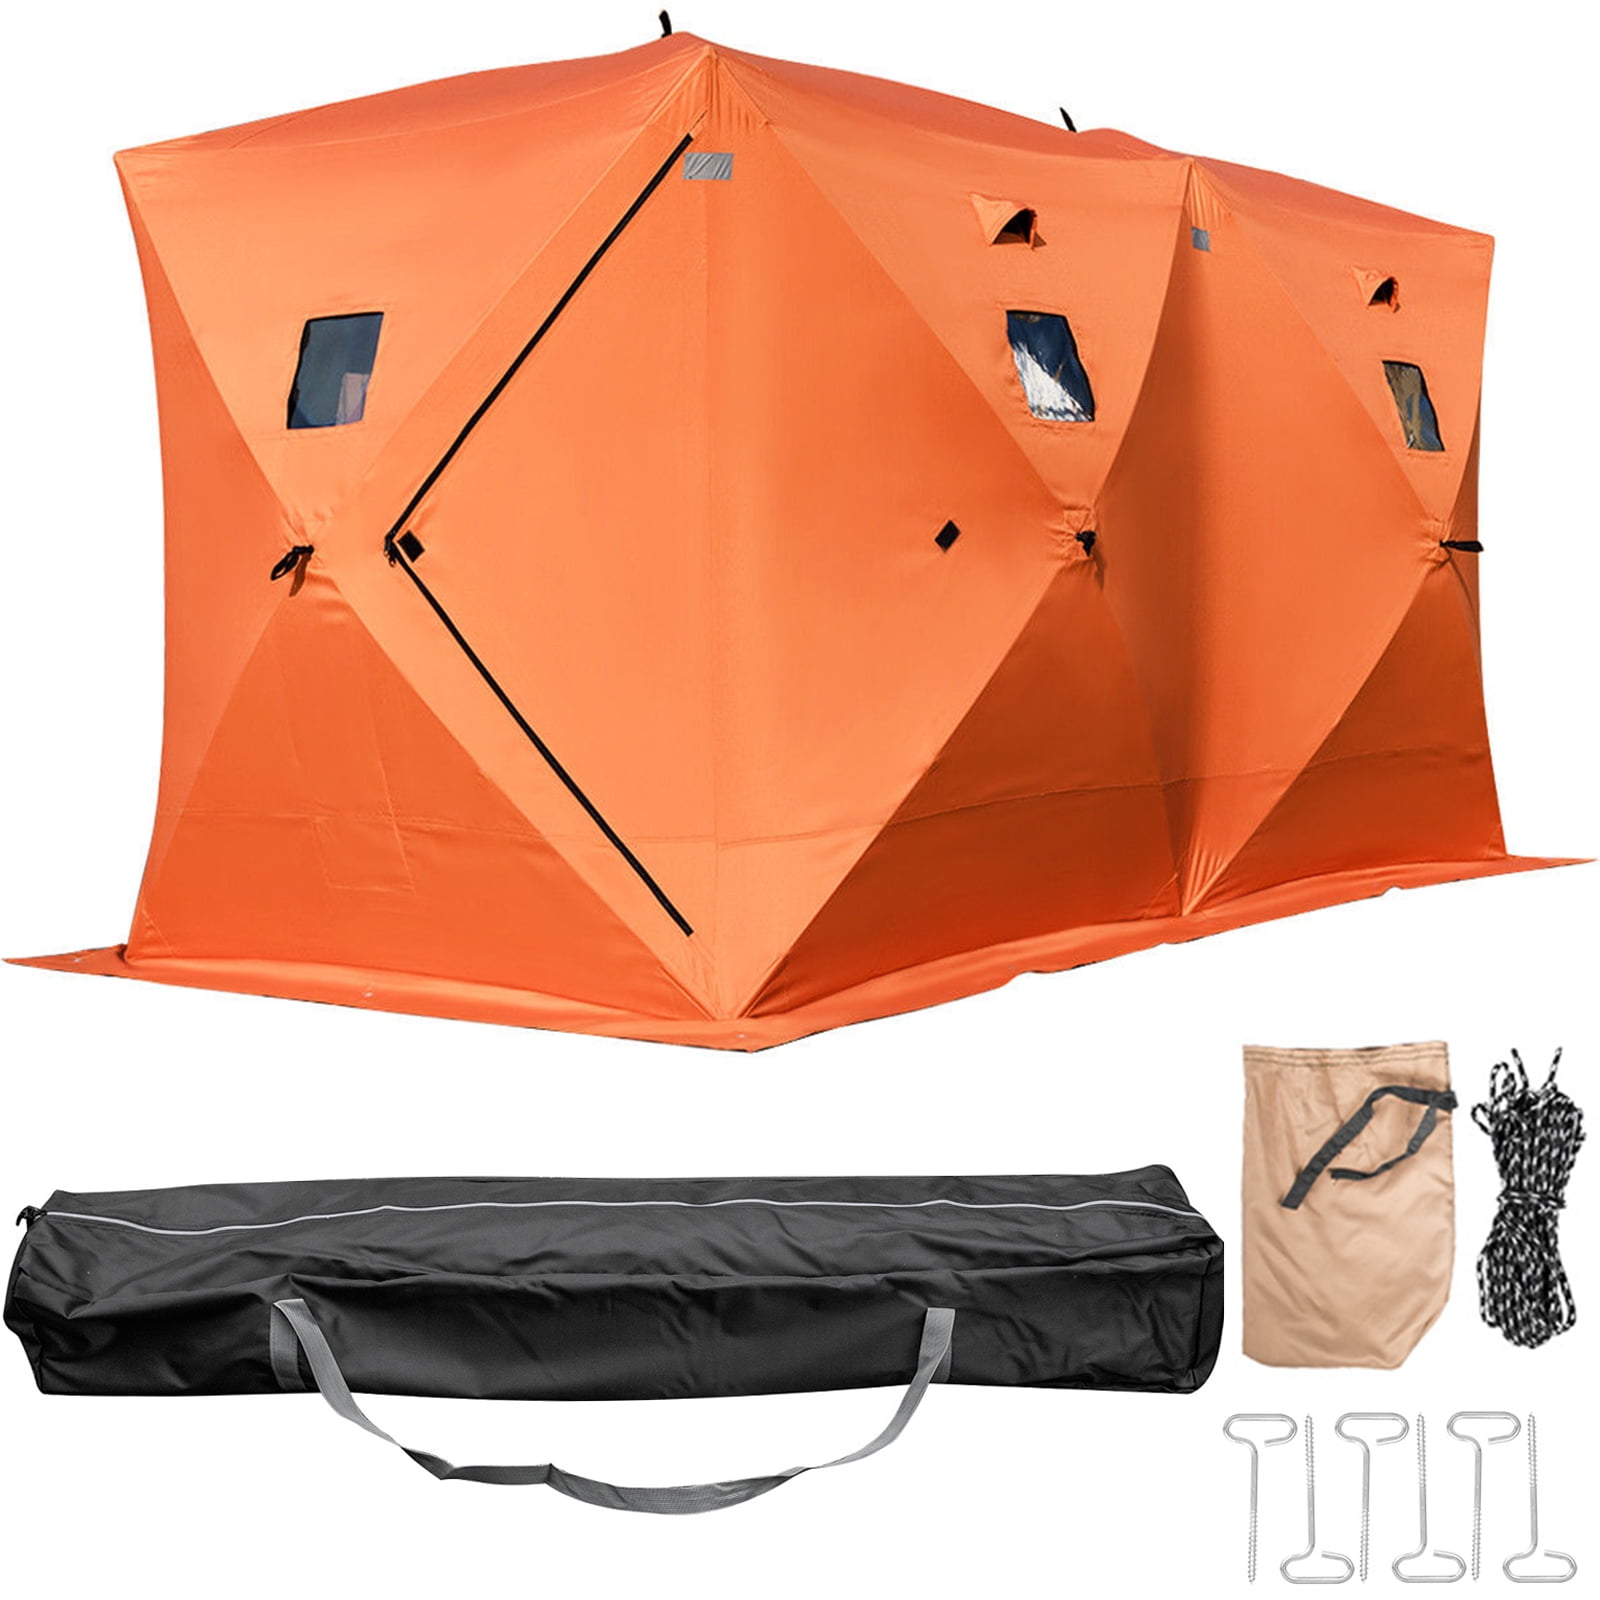 VEVORbrand Ice Fishing Shelter Tent 8 Person 300d Oxford Fabric Portable  Ice Shelter Strong Waterproof Ice Fish Shelter for Outdoor  Fishing(Orange,360